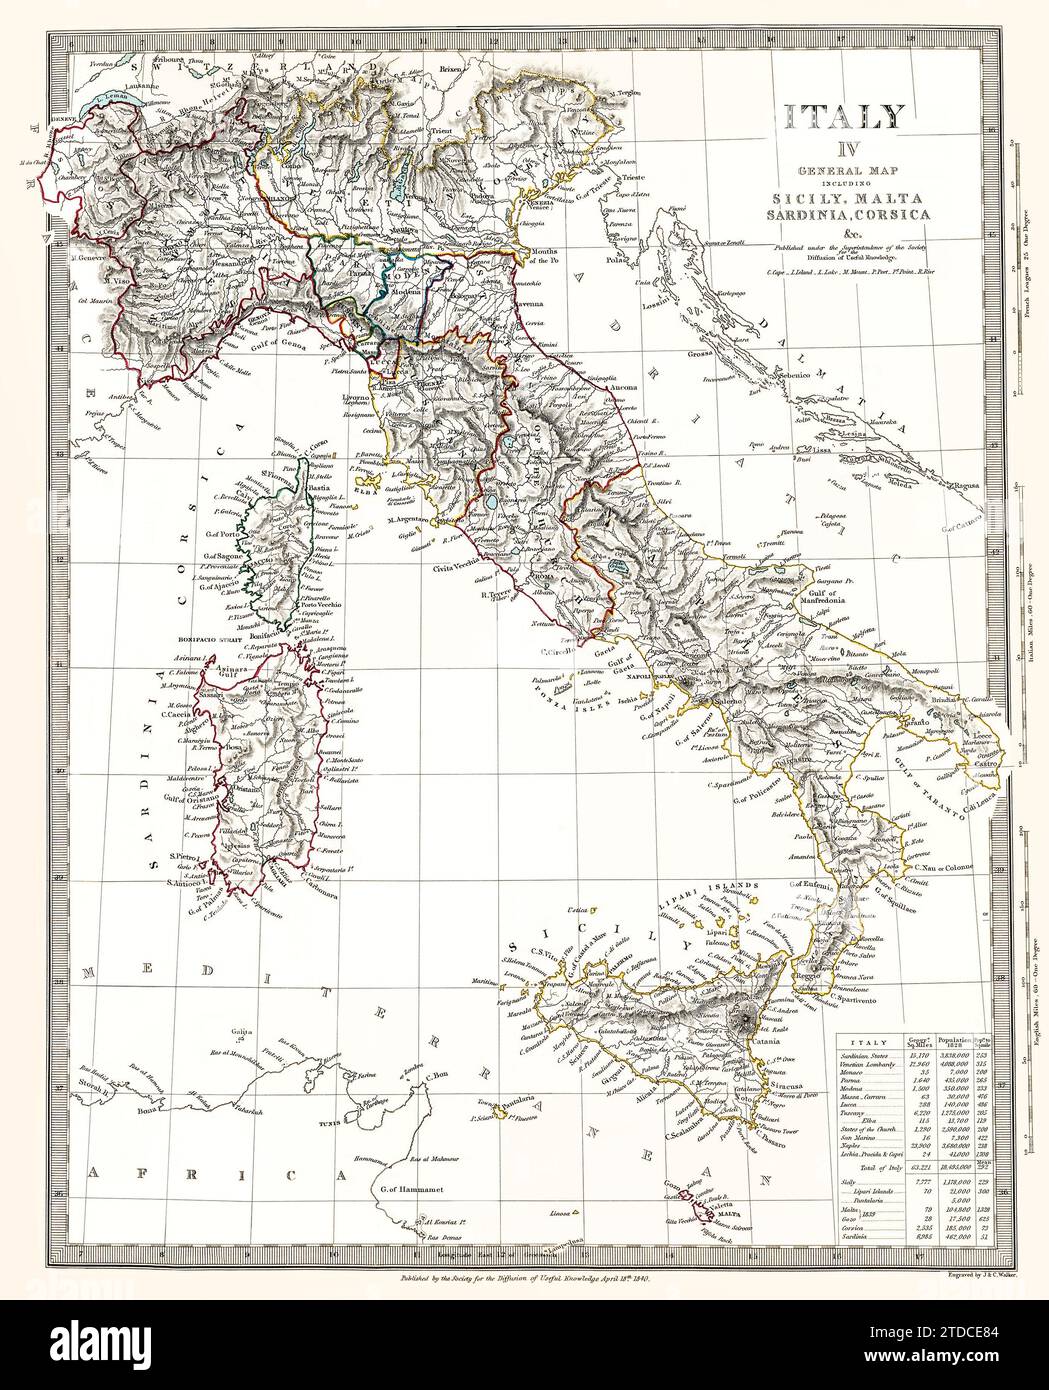 This is a digitally enhanced, restored reproduction of a beautifully detailed antique map of Italy showing political boundaries, outlined in color as existed around 1840. Population data is in a table on the lower right. The map was published in 1844. This is one of a series of maps published by the Society for the Diffusion of Useful Knowledge, a British organization. Stock Photo